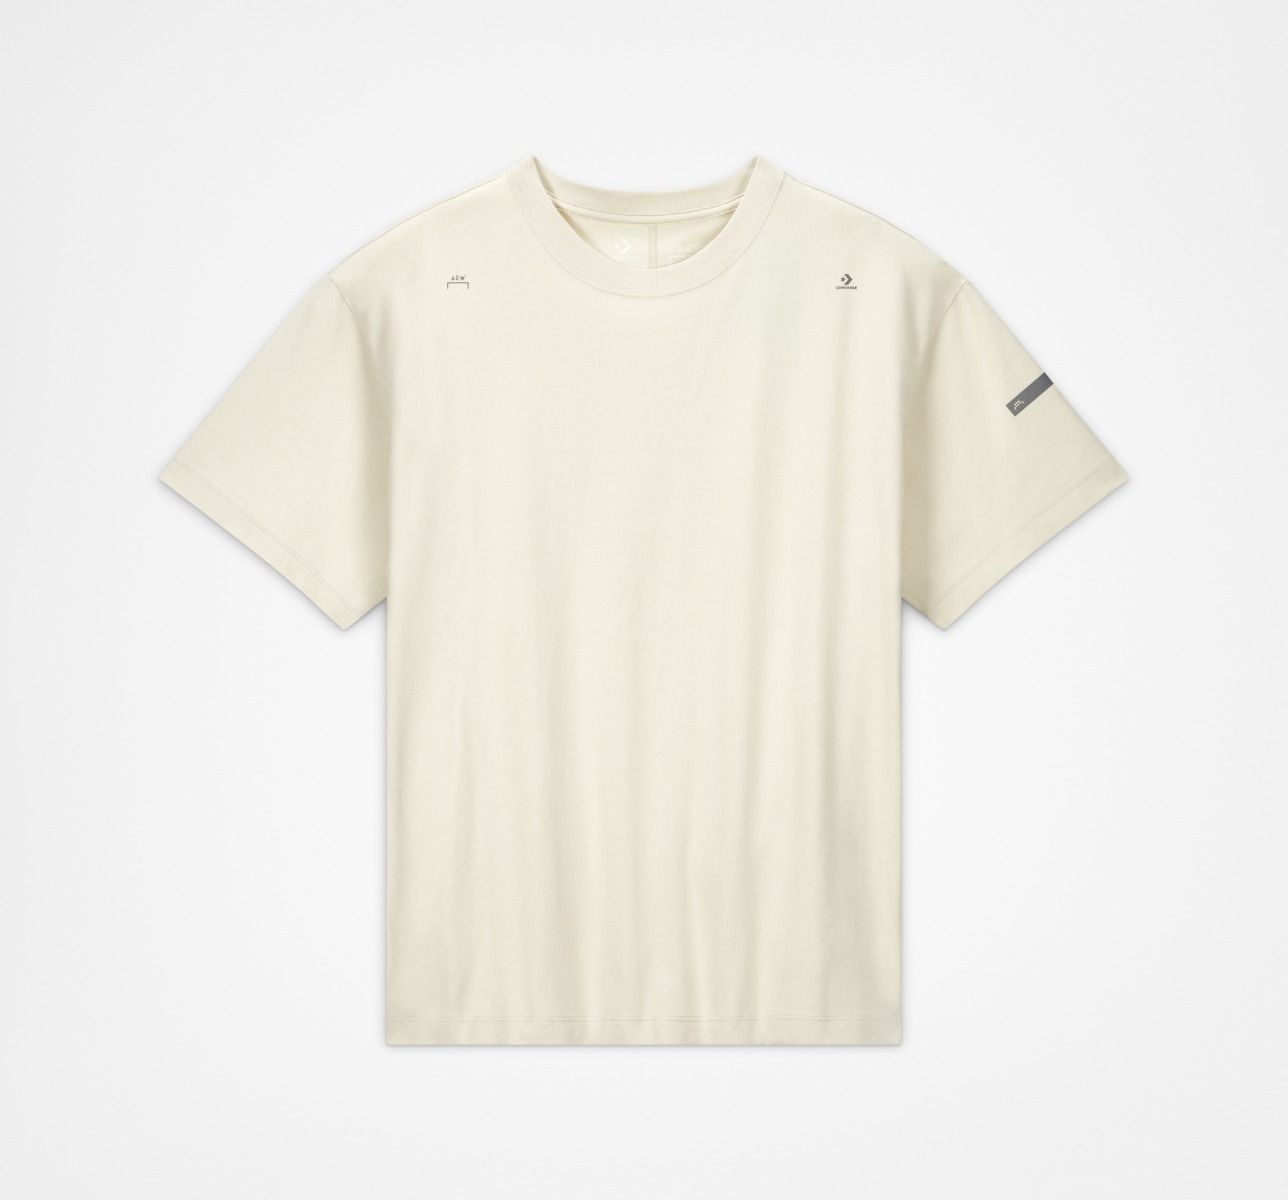 Converse Hockey Jersey In White 10007095 A01, $29, Asos